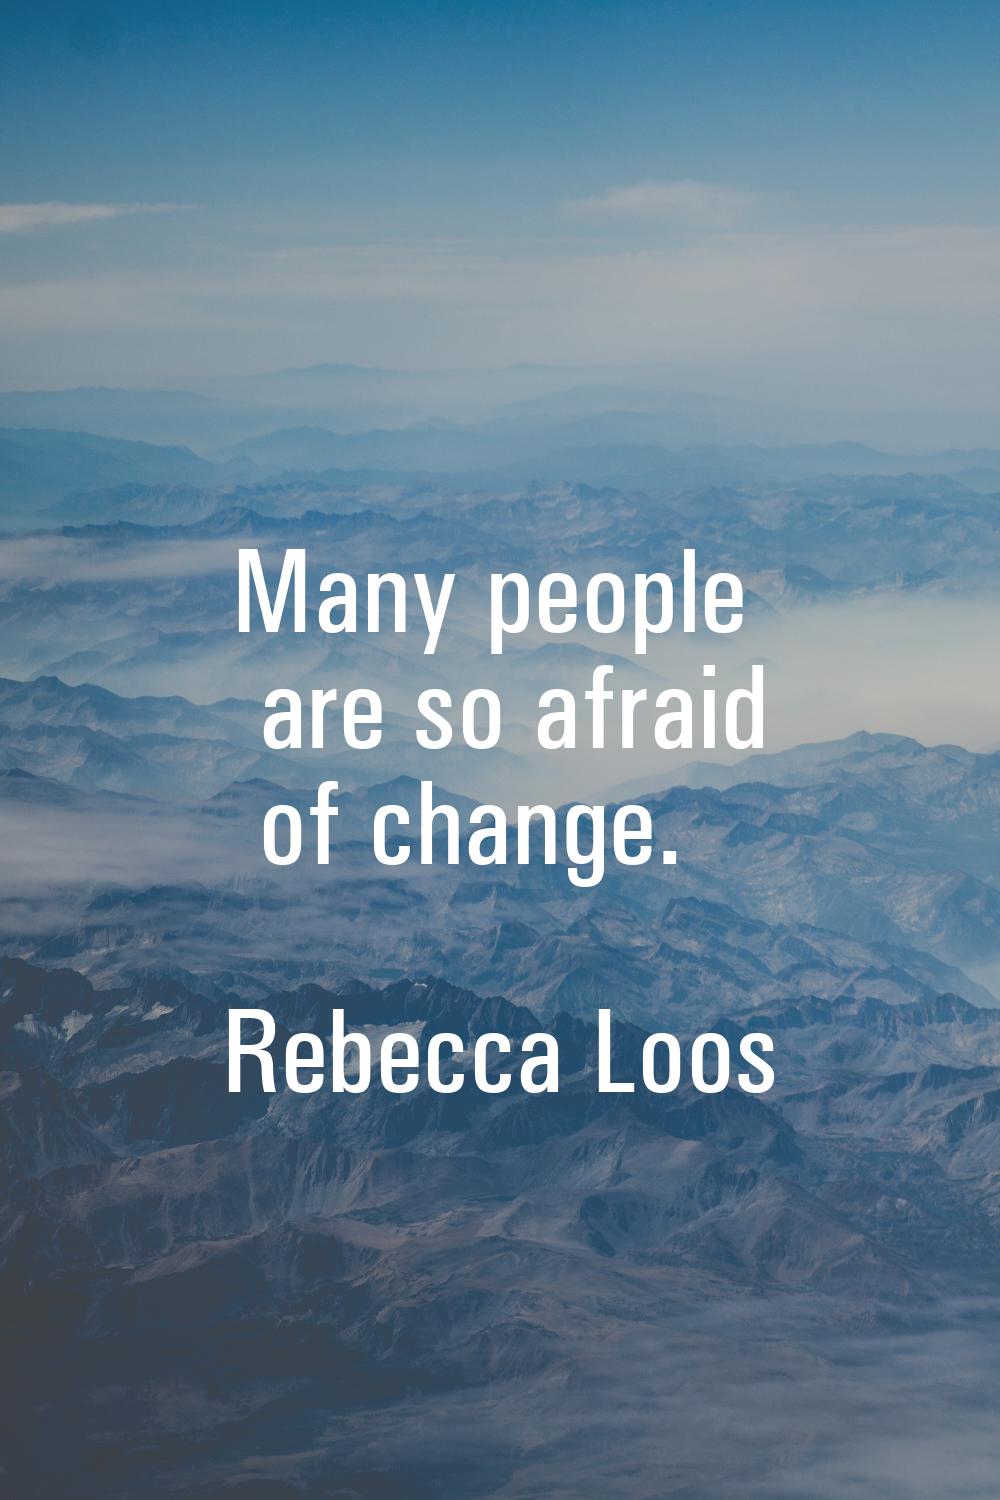 Many people are so afraid of change.